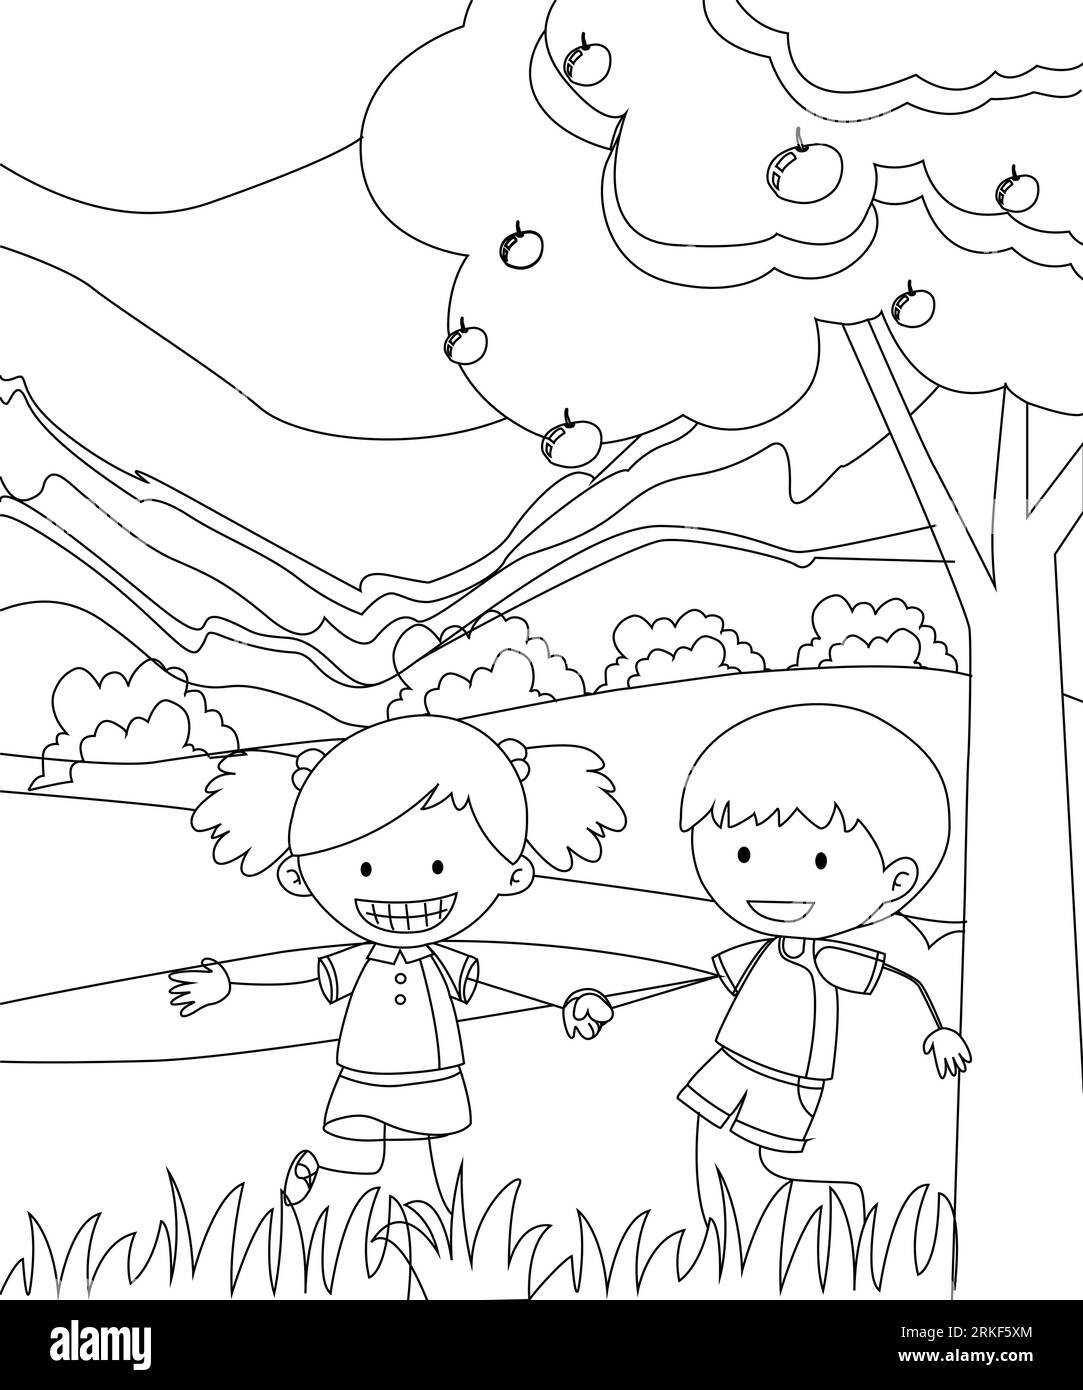 Kids Playing in the Garden Coloring Book Page. Vector black and white coloring page. Stock Vector